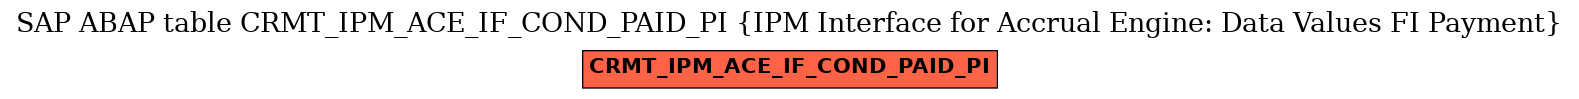 E-R Diagram for table CRMT_IPM_ACE_IF_COND_PAID_PI (IPM Interface for Accrual Engine: Data Values FI Payment)